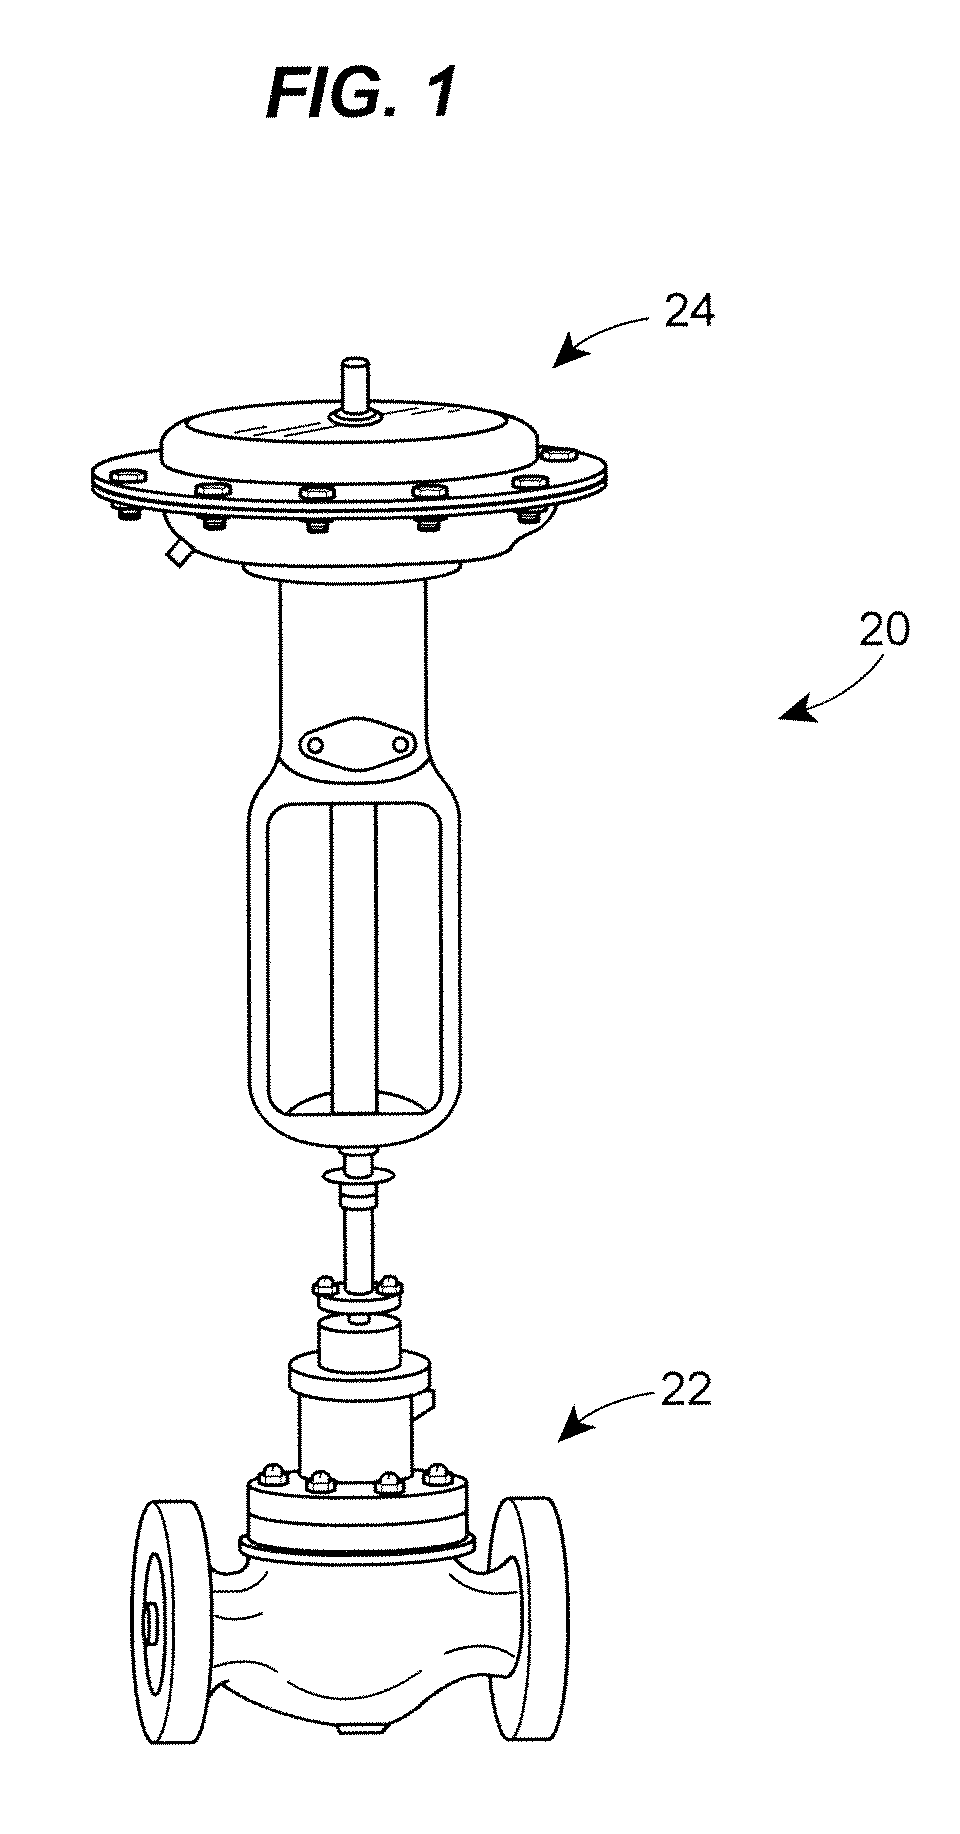 Device and Method for Determining a Failure Mode of a Pneumatic Control Valve Assembly